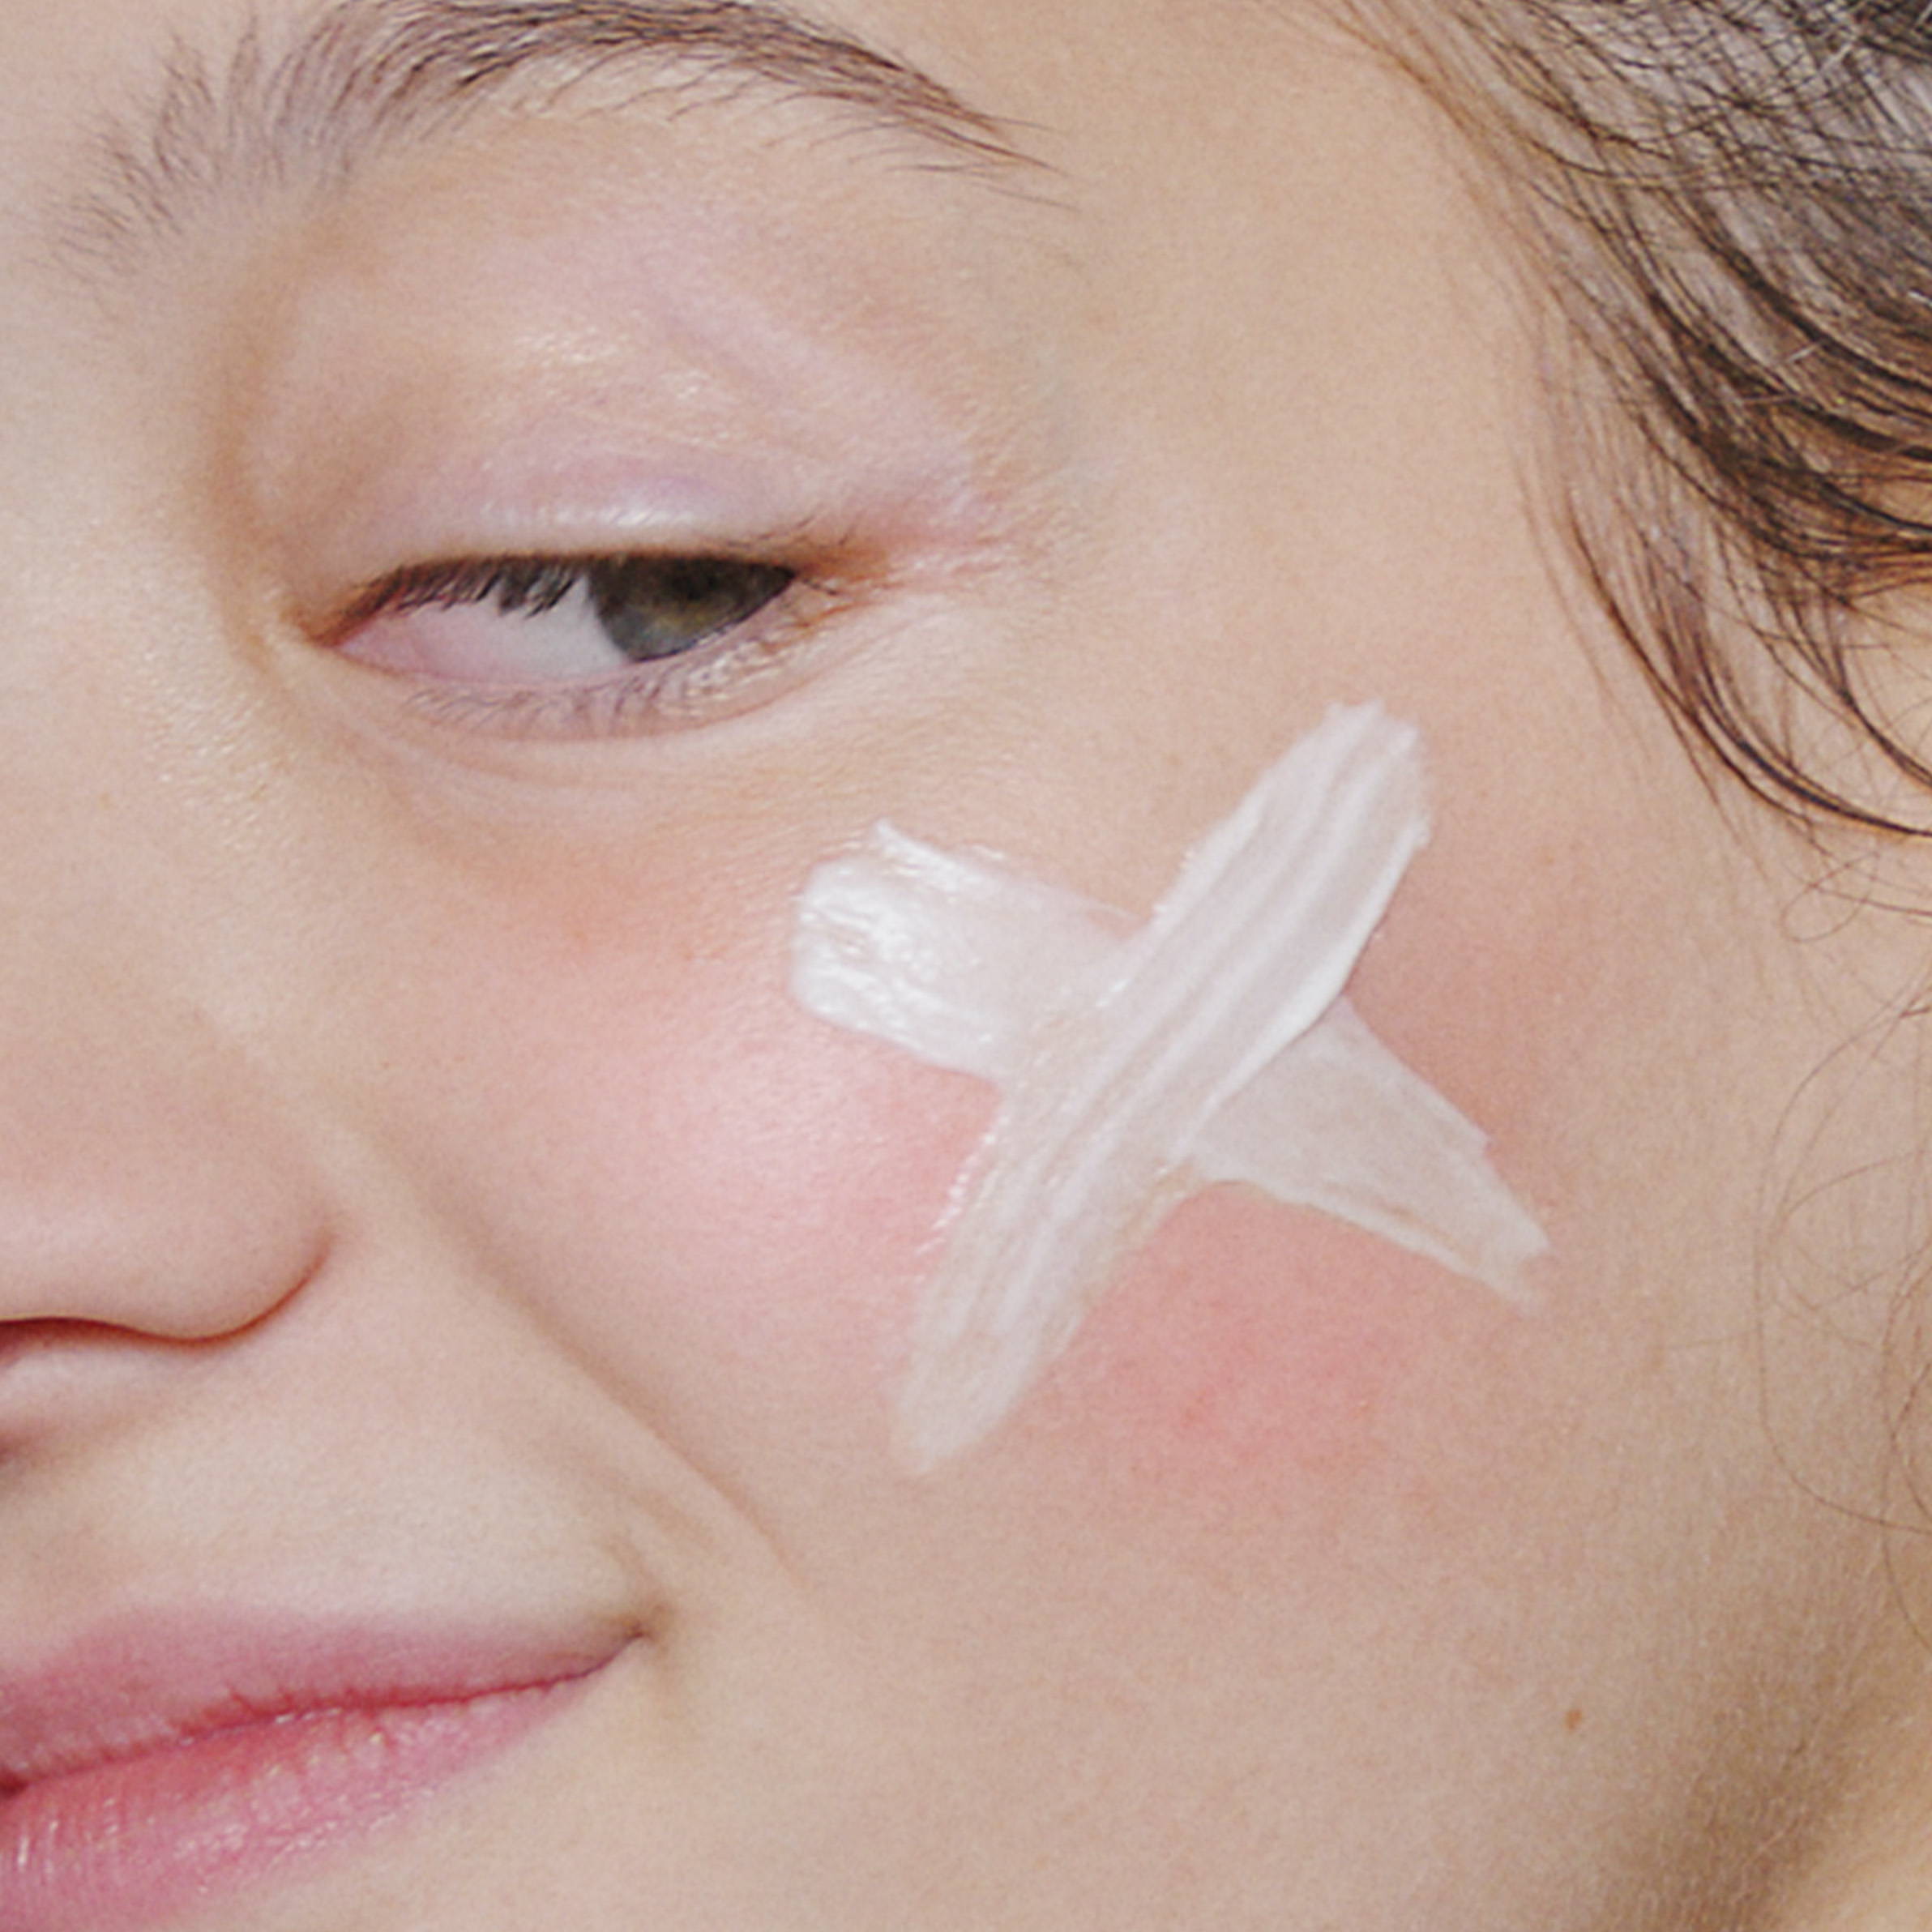 Model with the Stabilizing Repair Cream applied to face in an 